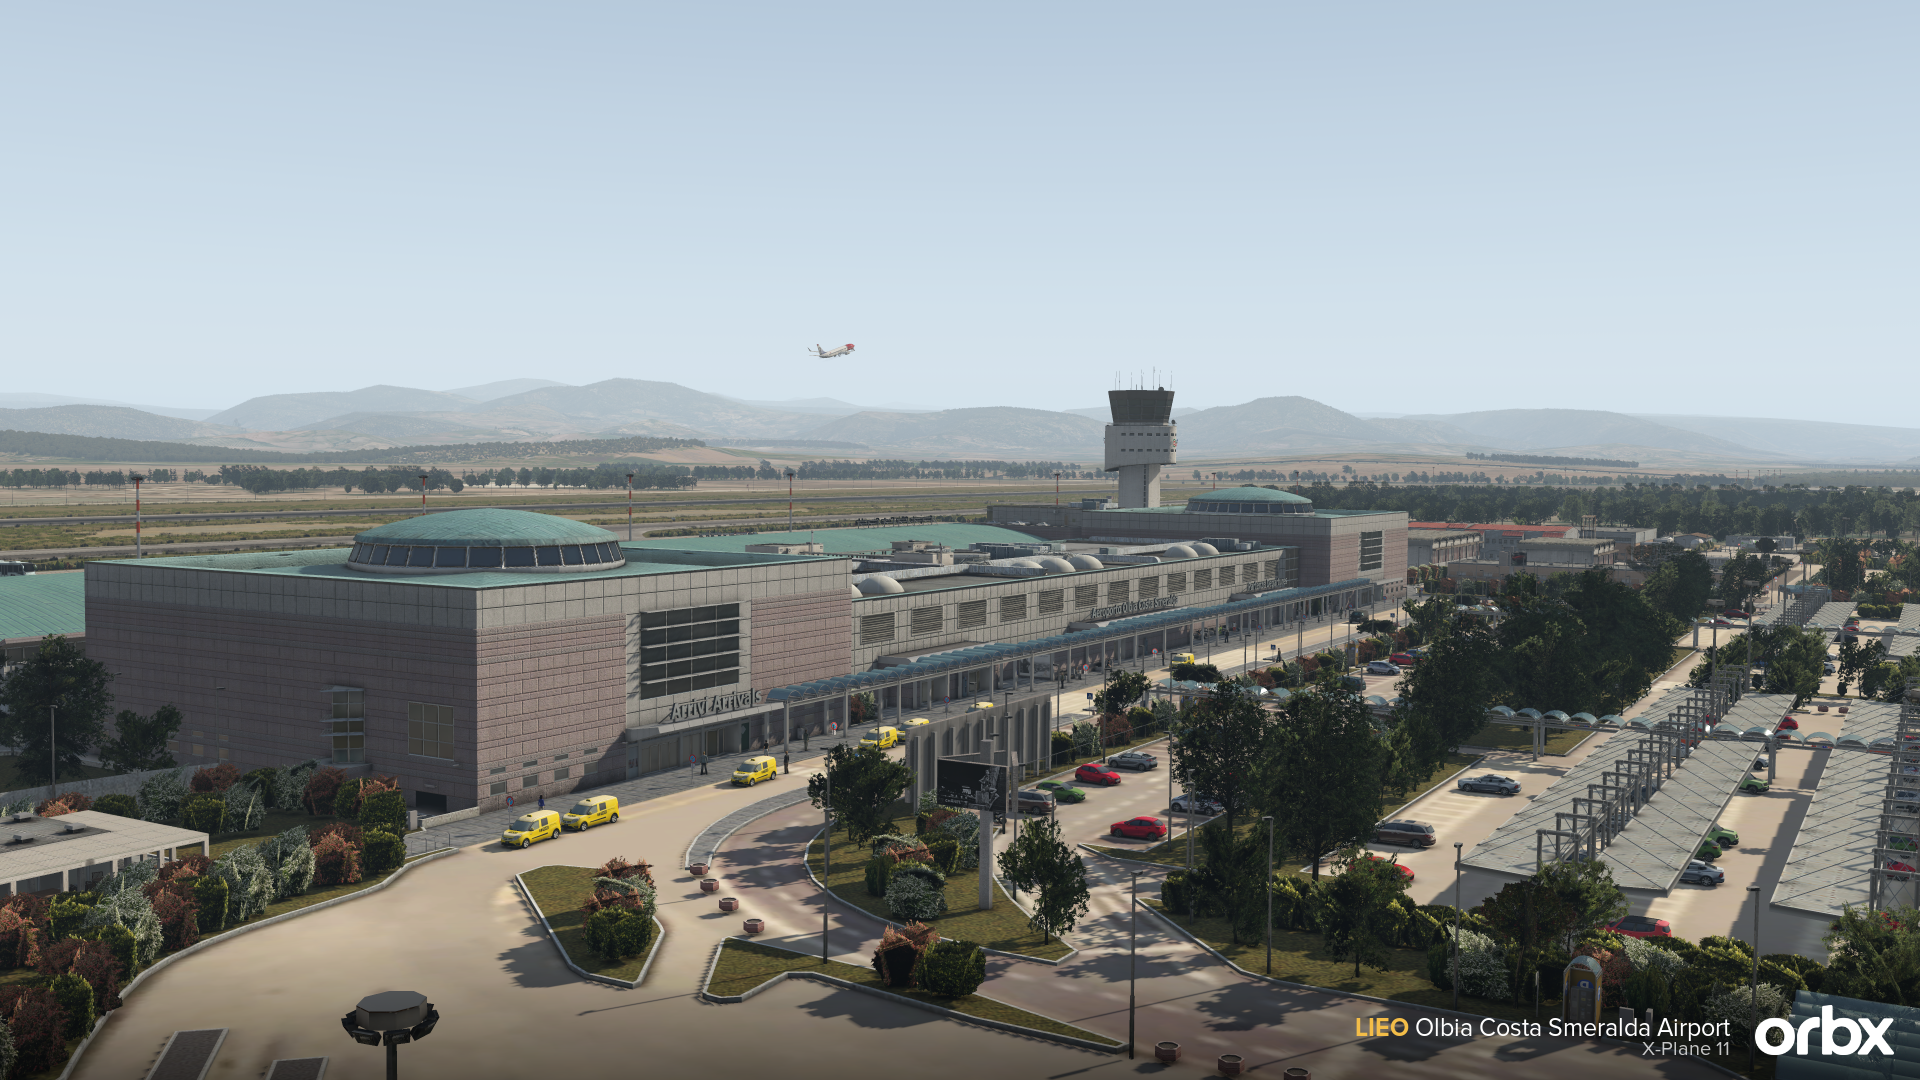 Orbx Releases Olbia Airport for XP11 - Orbx, X-Plane